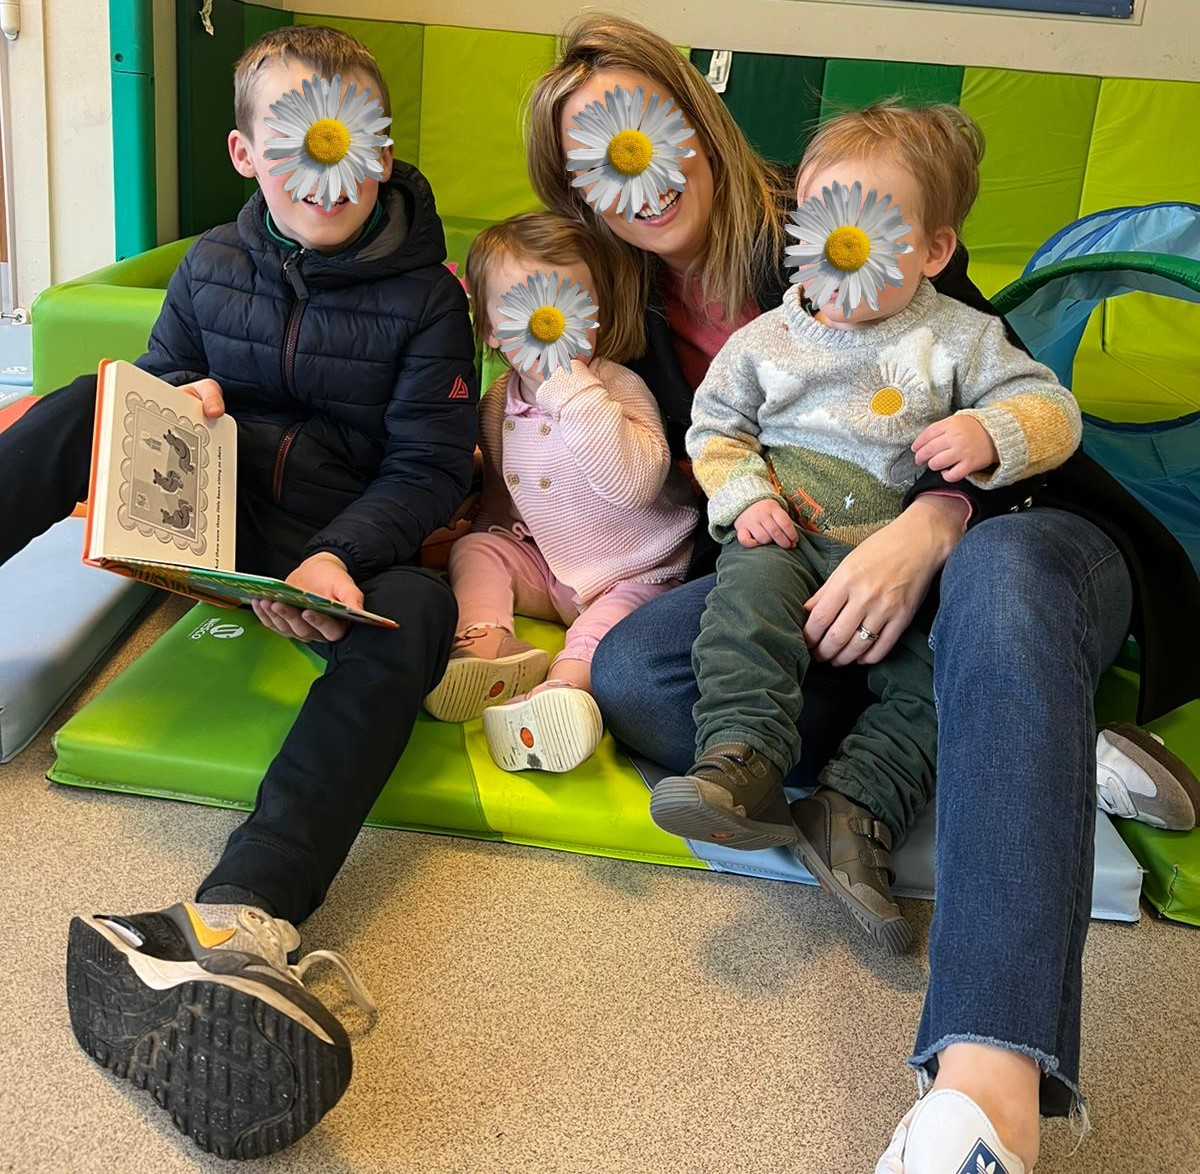 𝐓𝐞𝐫𝐞𝐧𝐮𝐫𝐞 𝐂𝐞𝐧𝐭𝐫𝐞: Great family pic during the recent World Book Day when some parents came in the morning to read the books for their children #familyfuntime #WorldBookDay #daisychaincare #childcaredublin #montessori #terenure